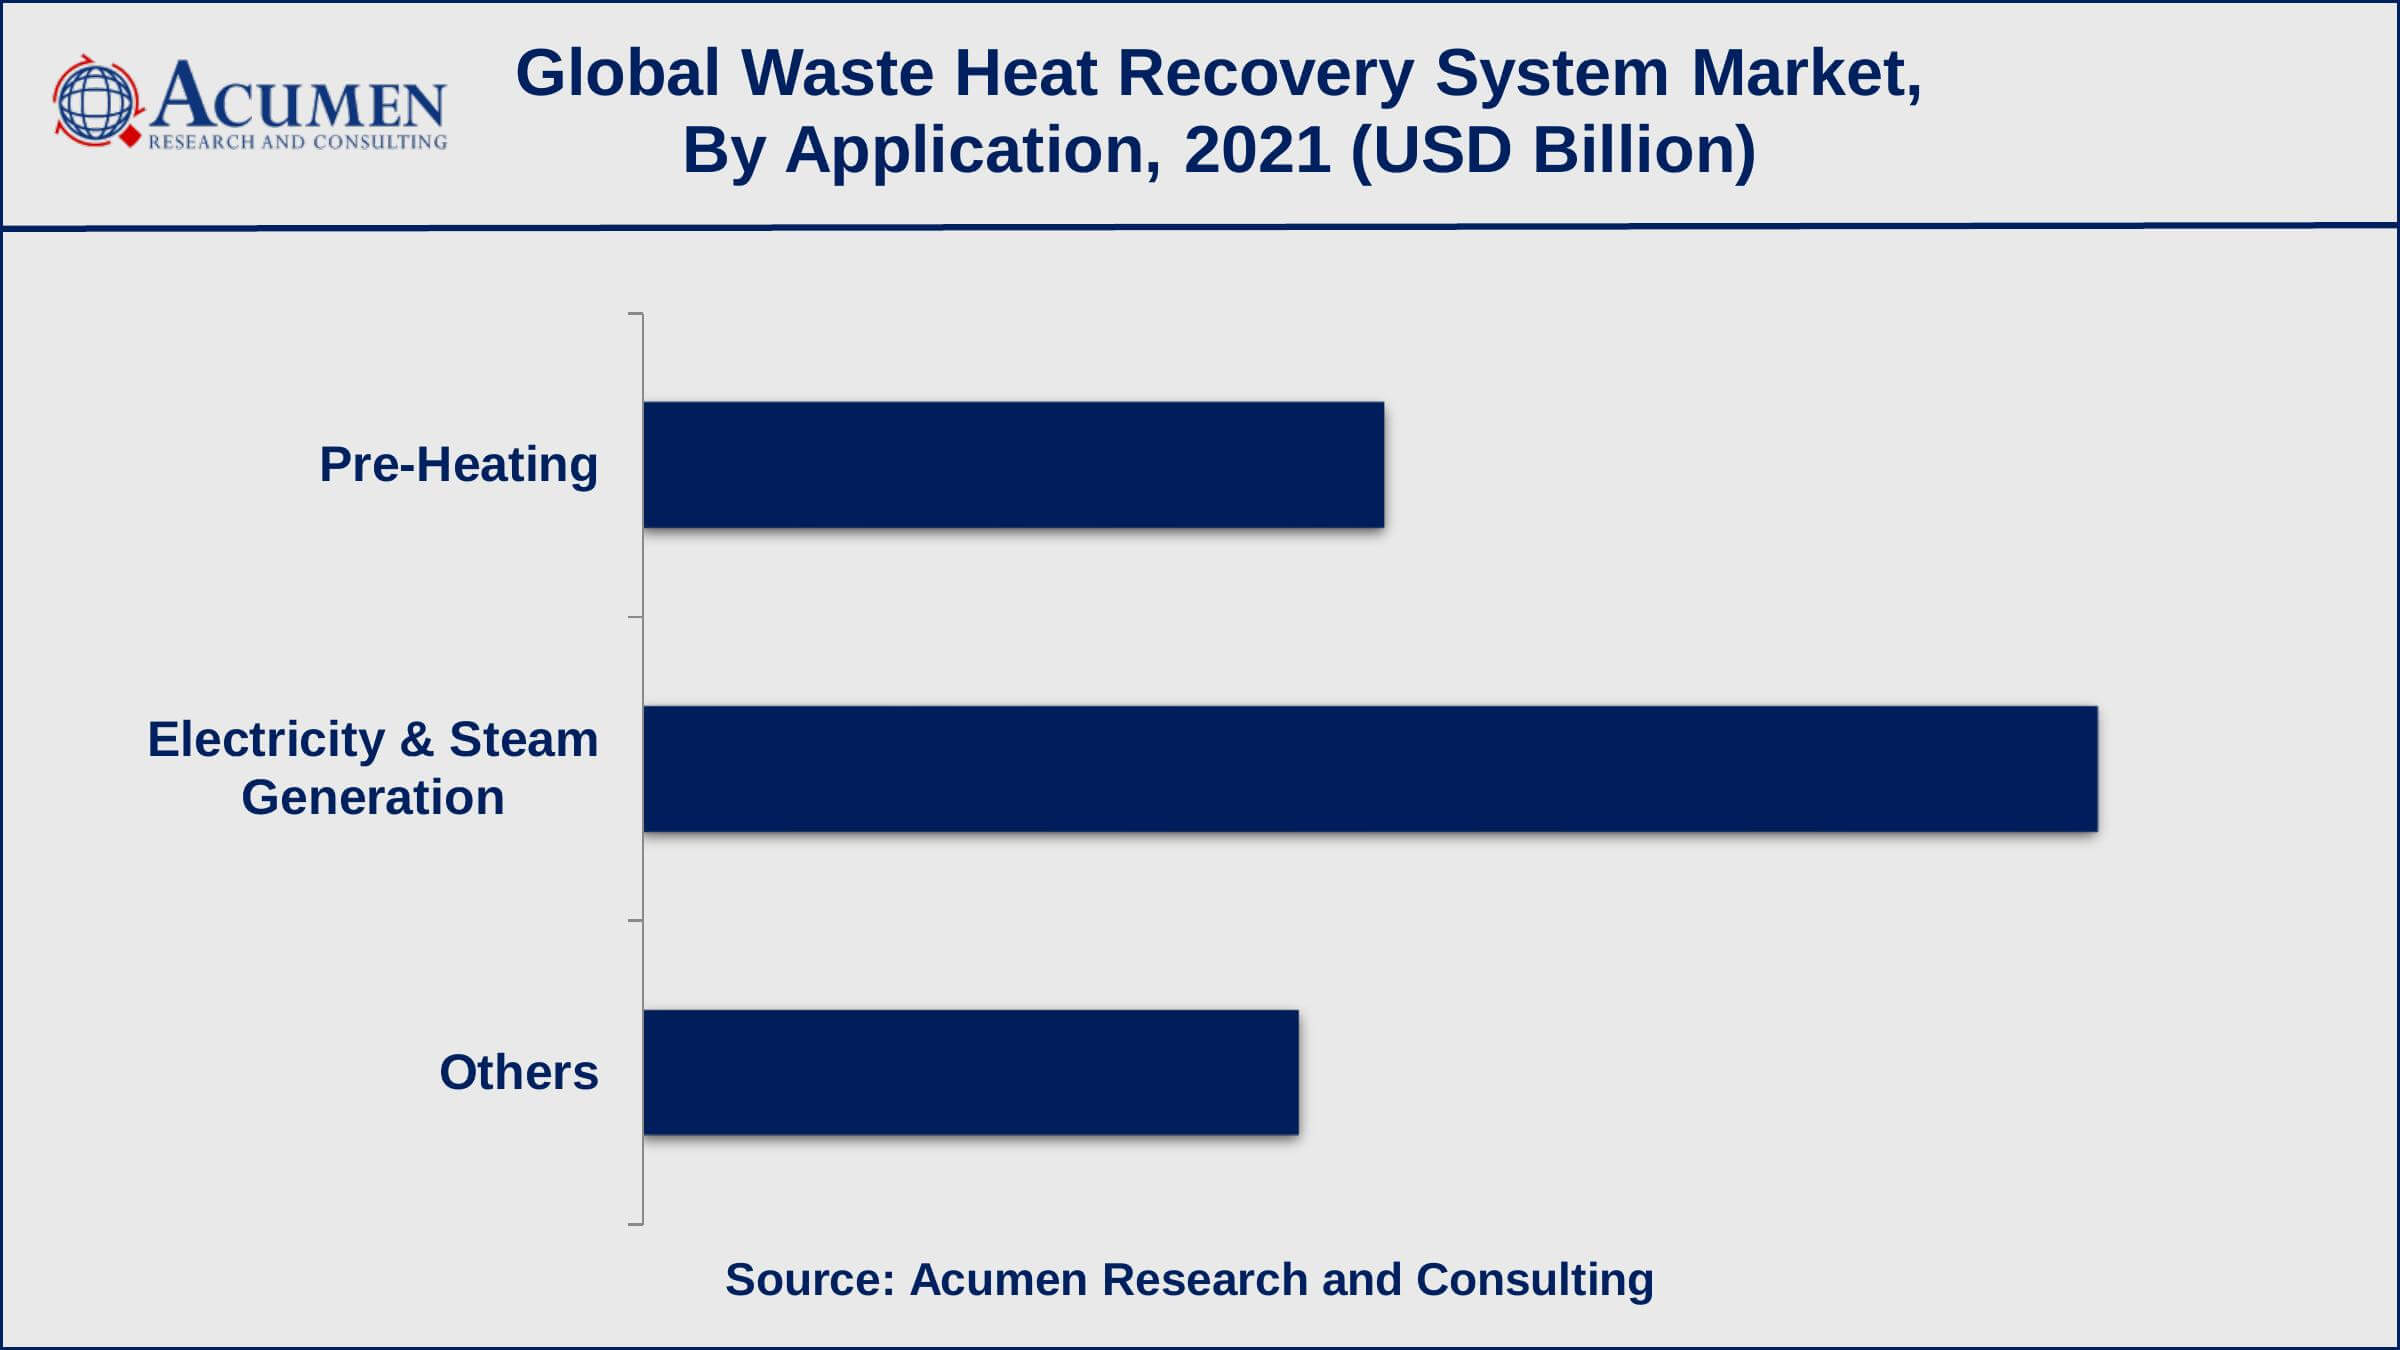 Europe waste heat recovery system market share generated over 33% shares in 2021